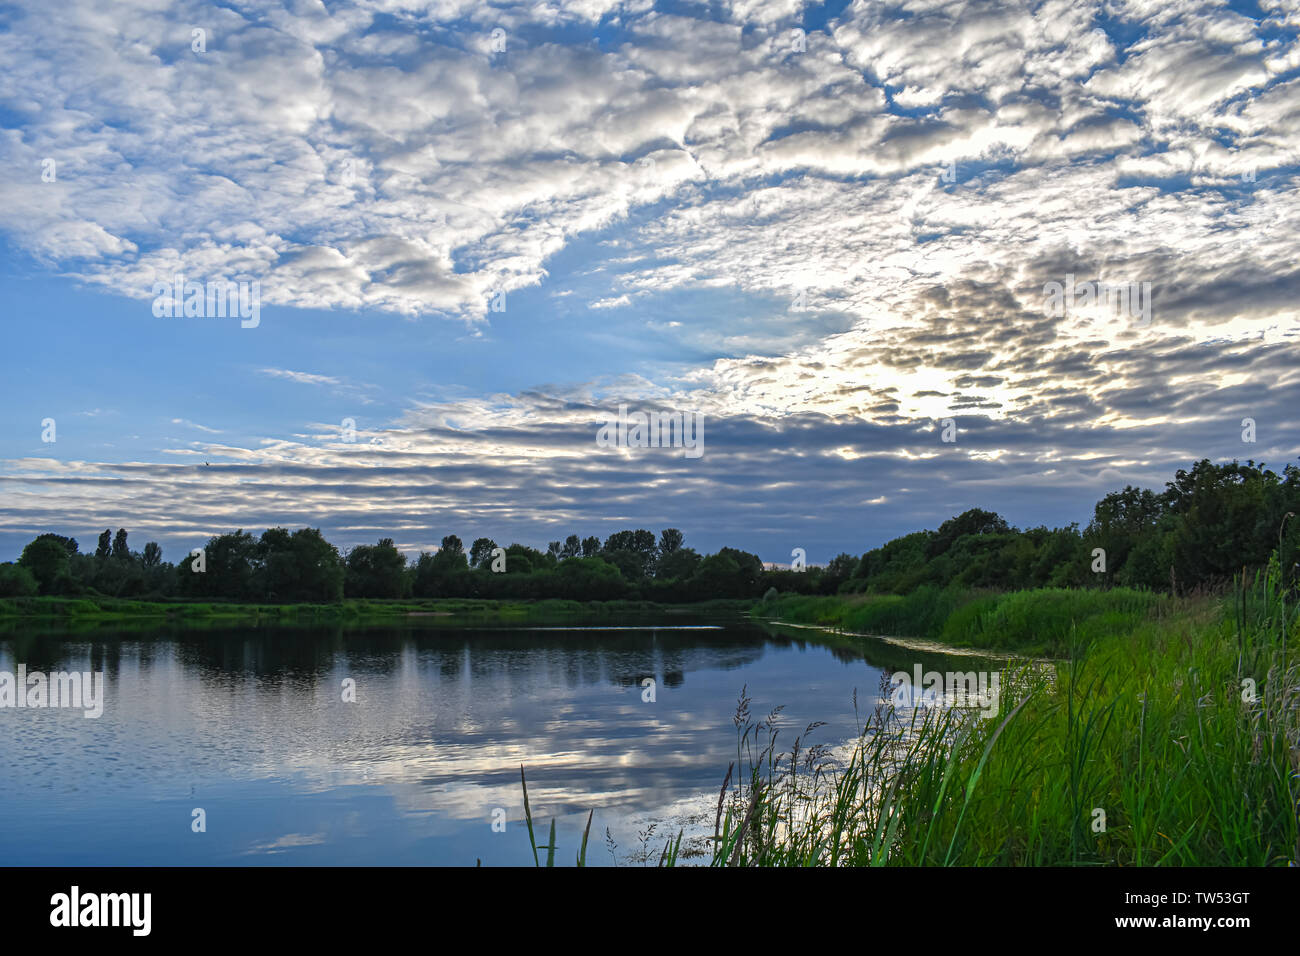 Nature Reserve in Oxfordshire England. Beautiful Lake reflects the blue sky above on a Summer evening. Stock Photo